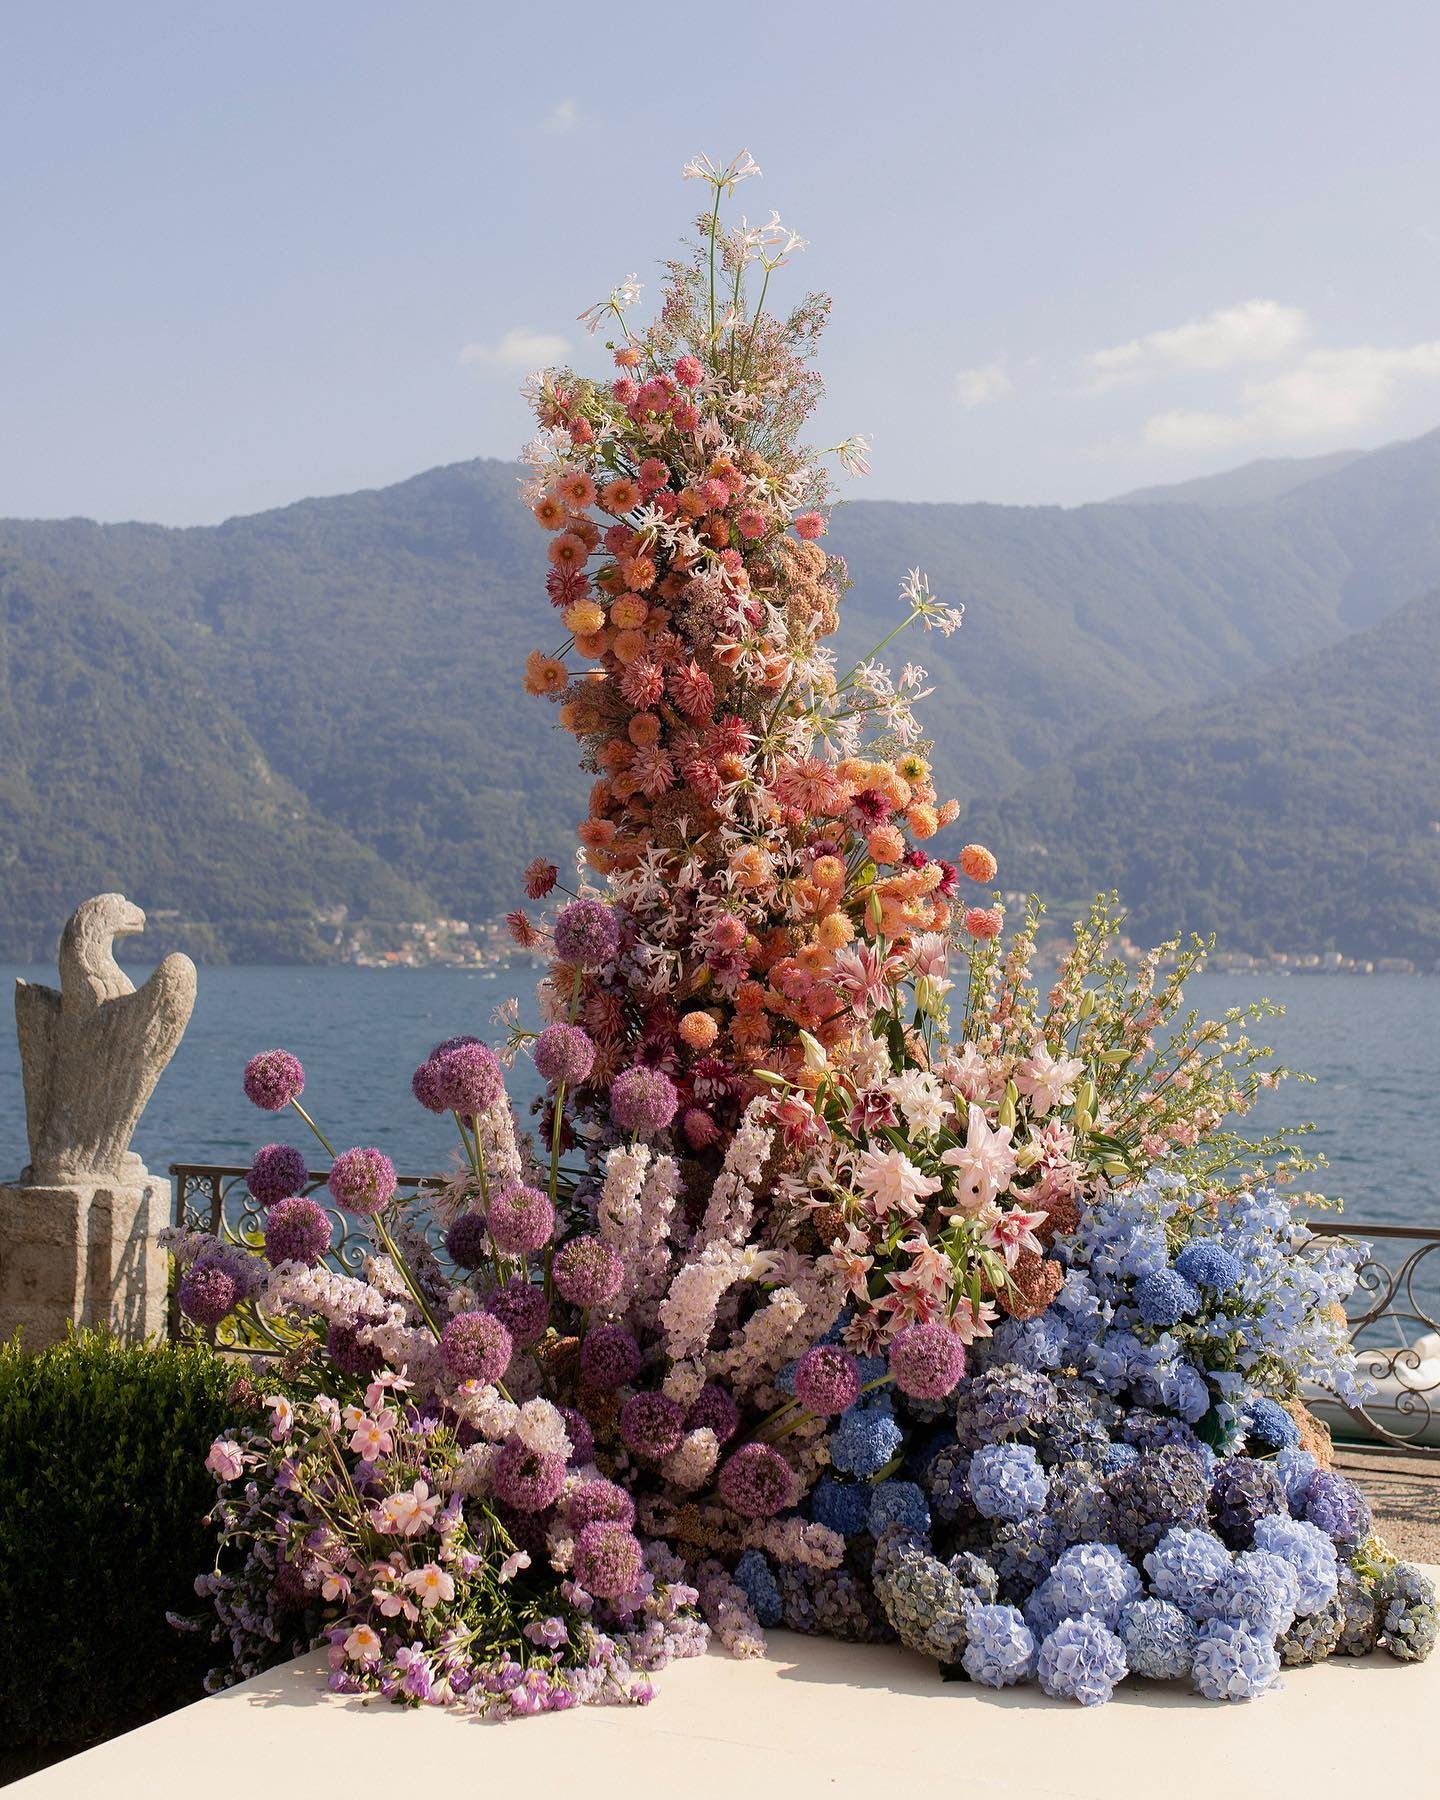 A little preview into Rally &amp; Alex&rsquo;s incredible four day wedding celebrations in Lake Como last month, all brought to life so beautifully by @lakecomoweddings. A treat to work alongside Aussie industry friends @moonandbackco @cassandralusi_